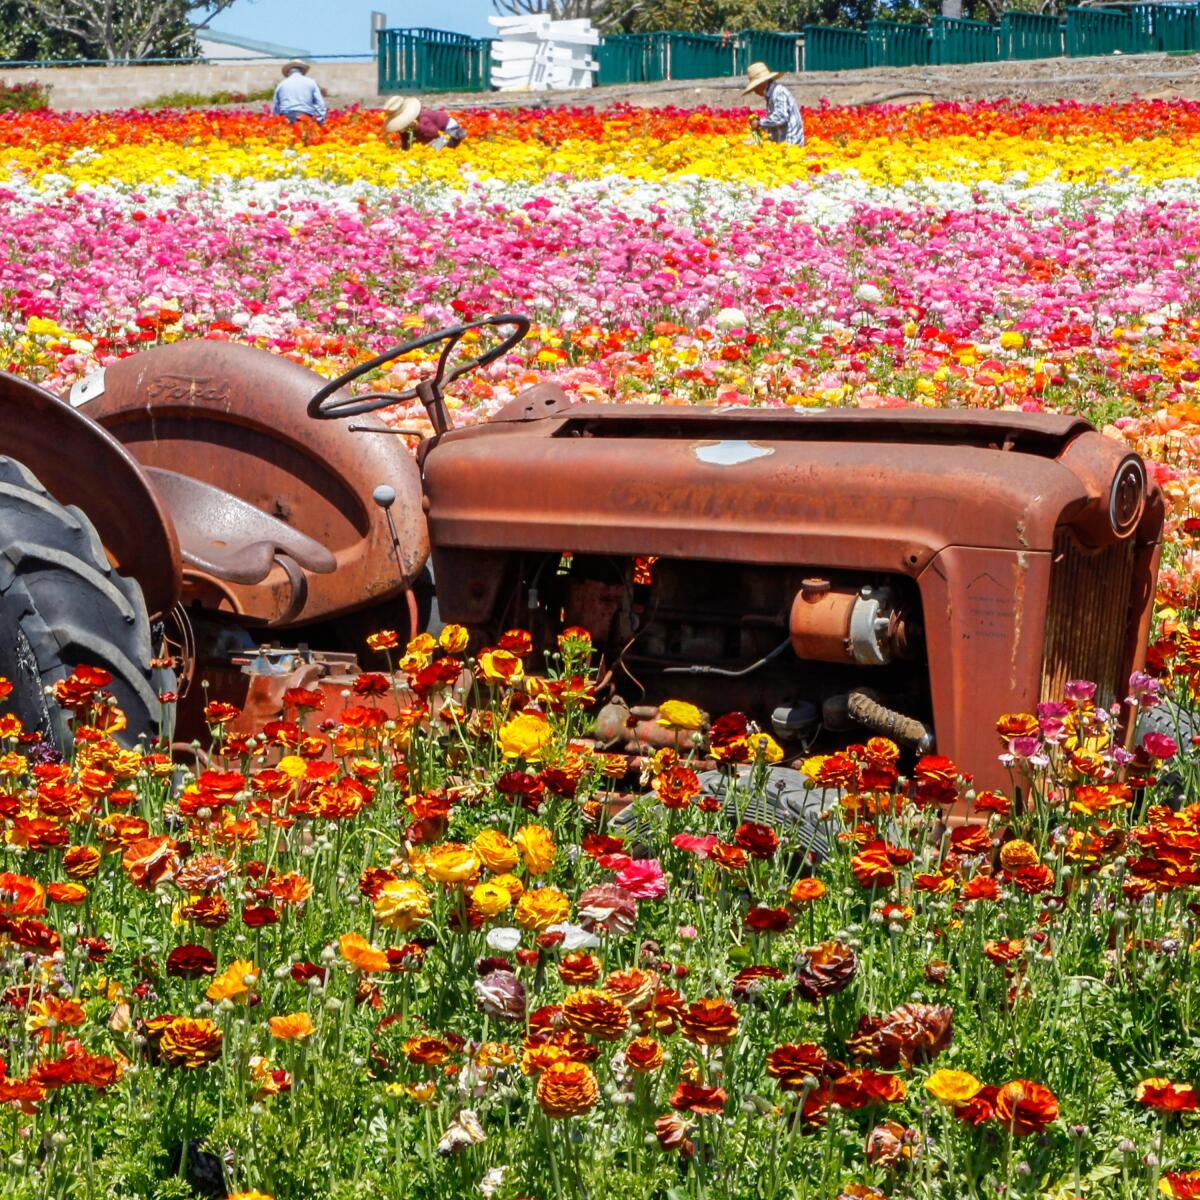 A tractor sits in a field of flowers